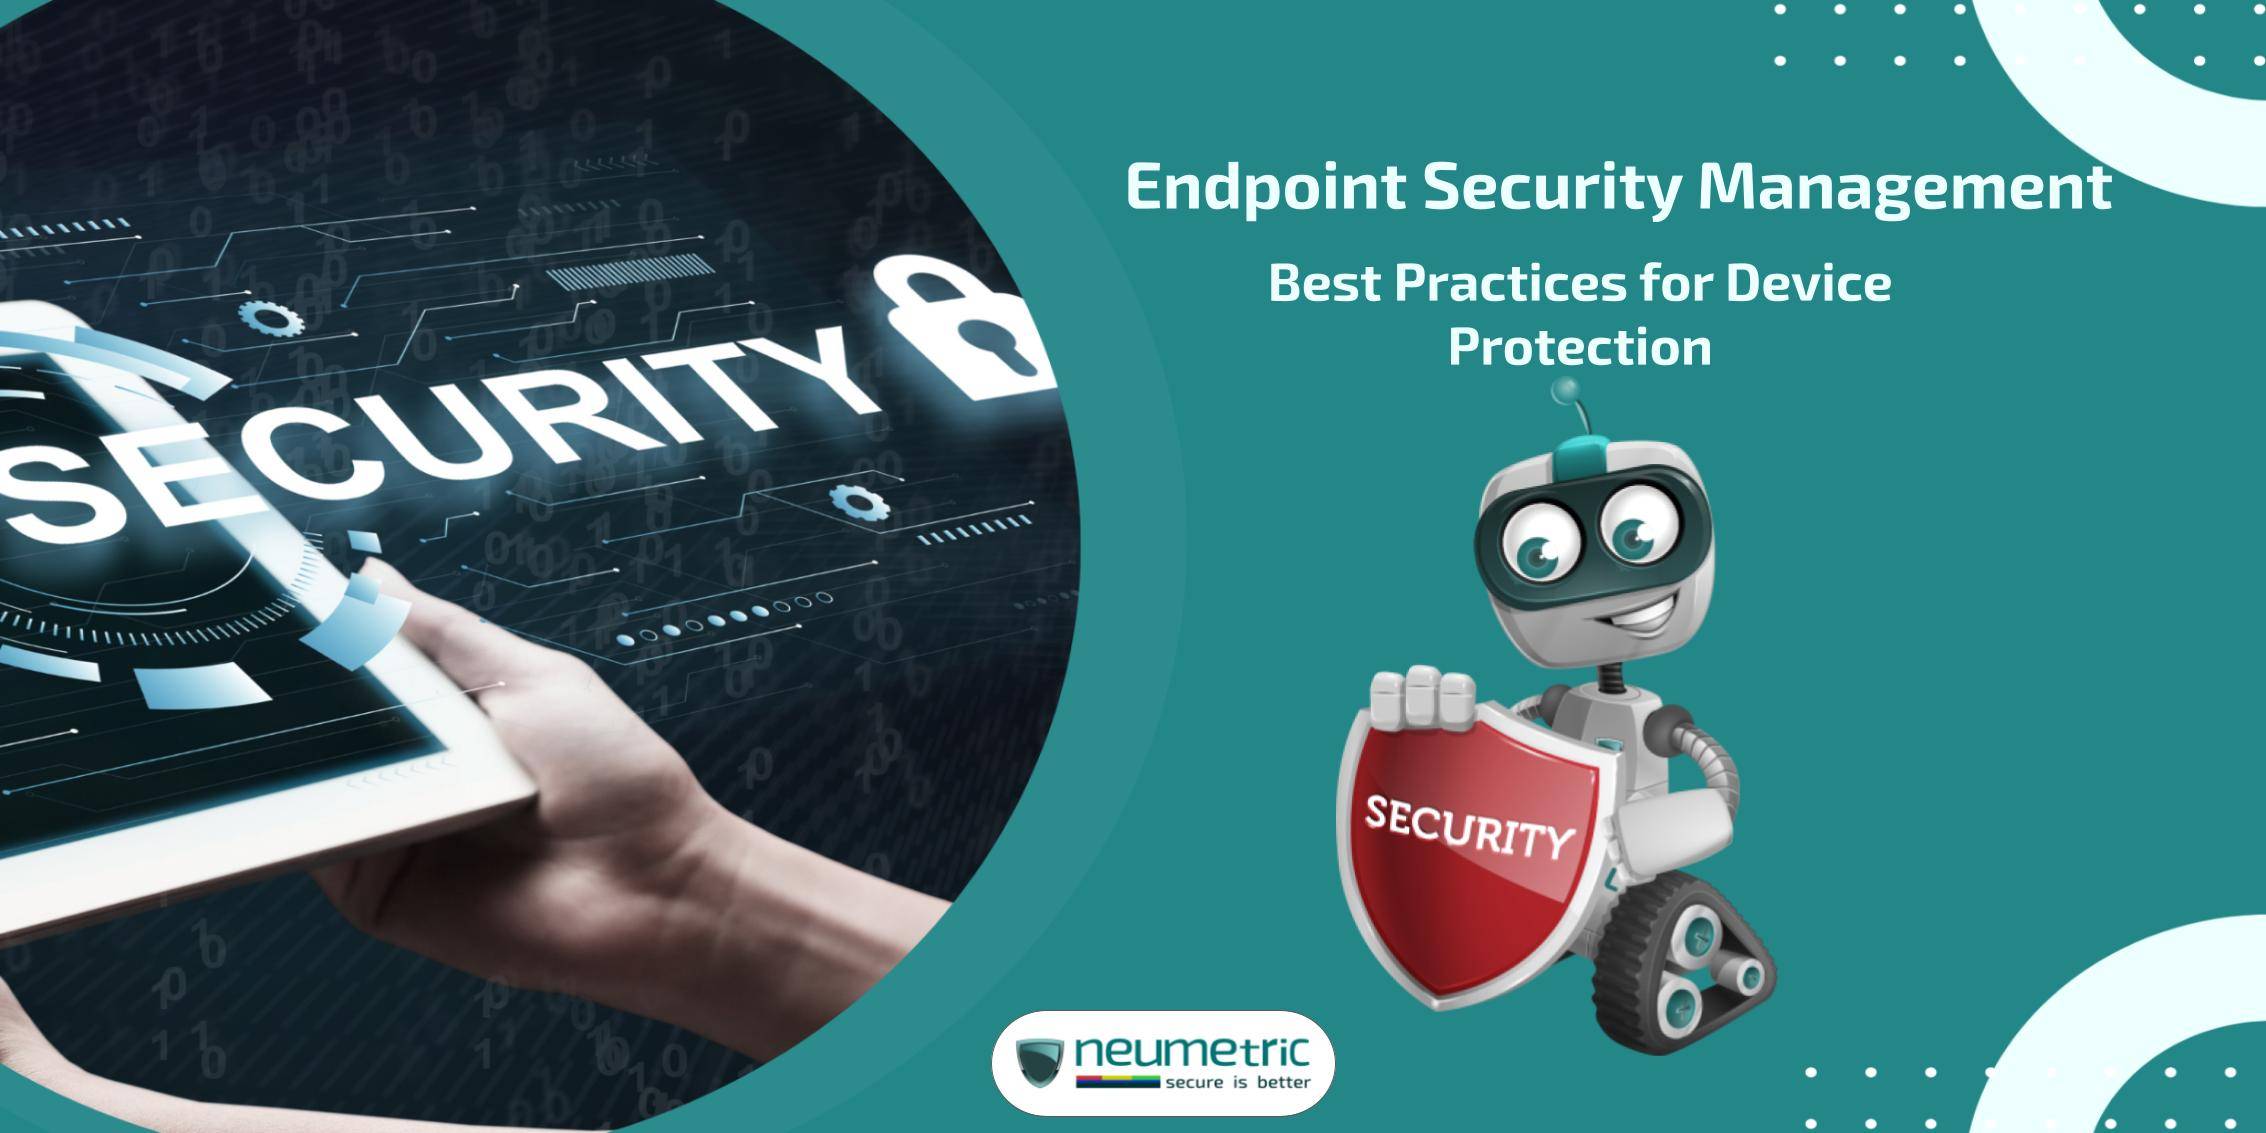 Endpoint Security Management: Best Practices for Device Protection